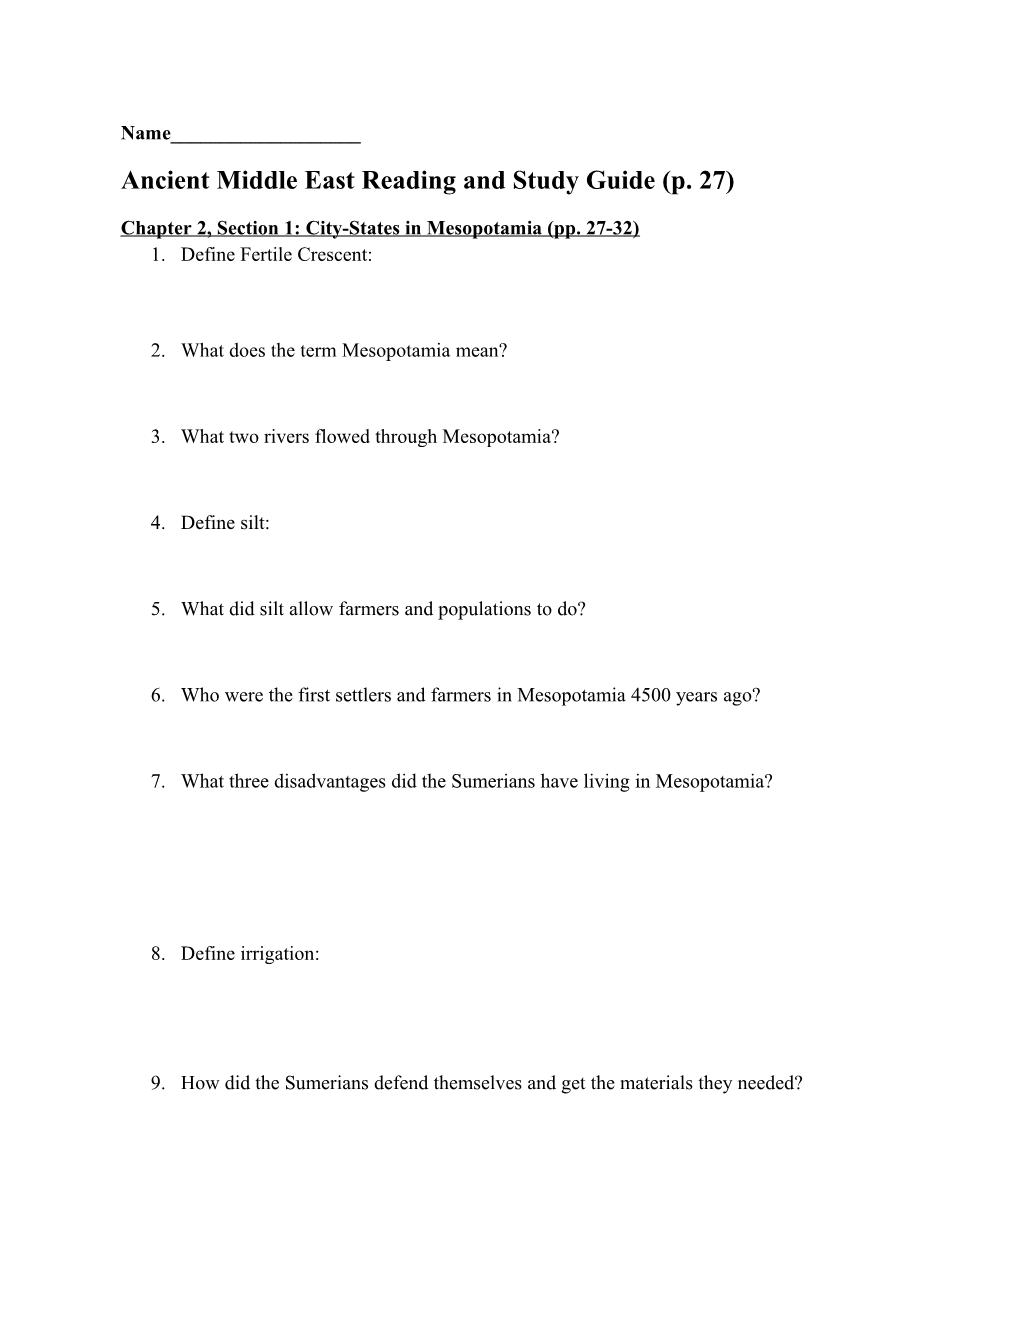 Ancient Middle East Reading and Study Guide (P. 27)